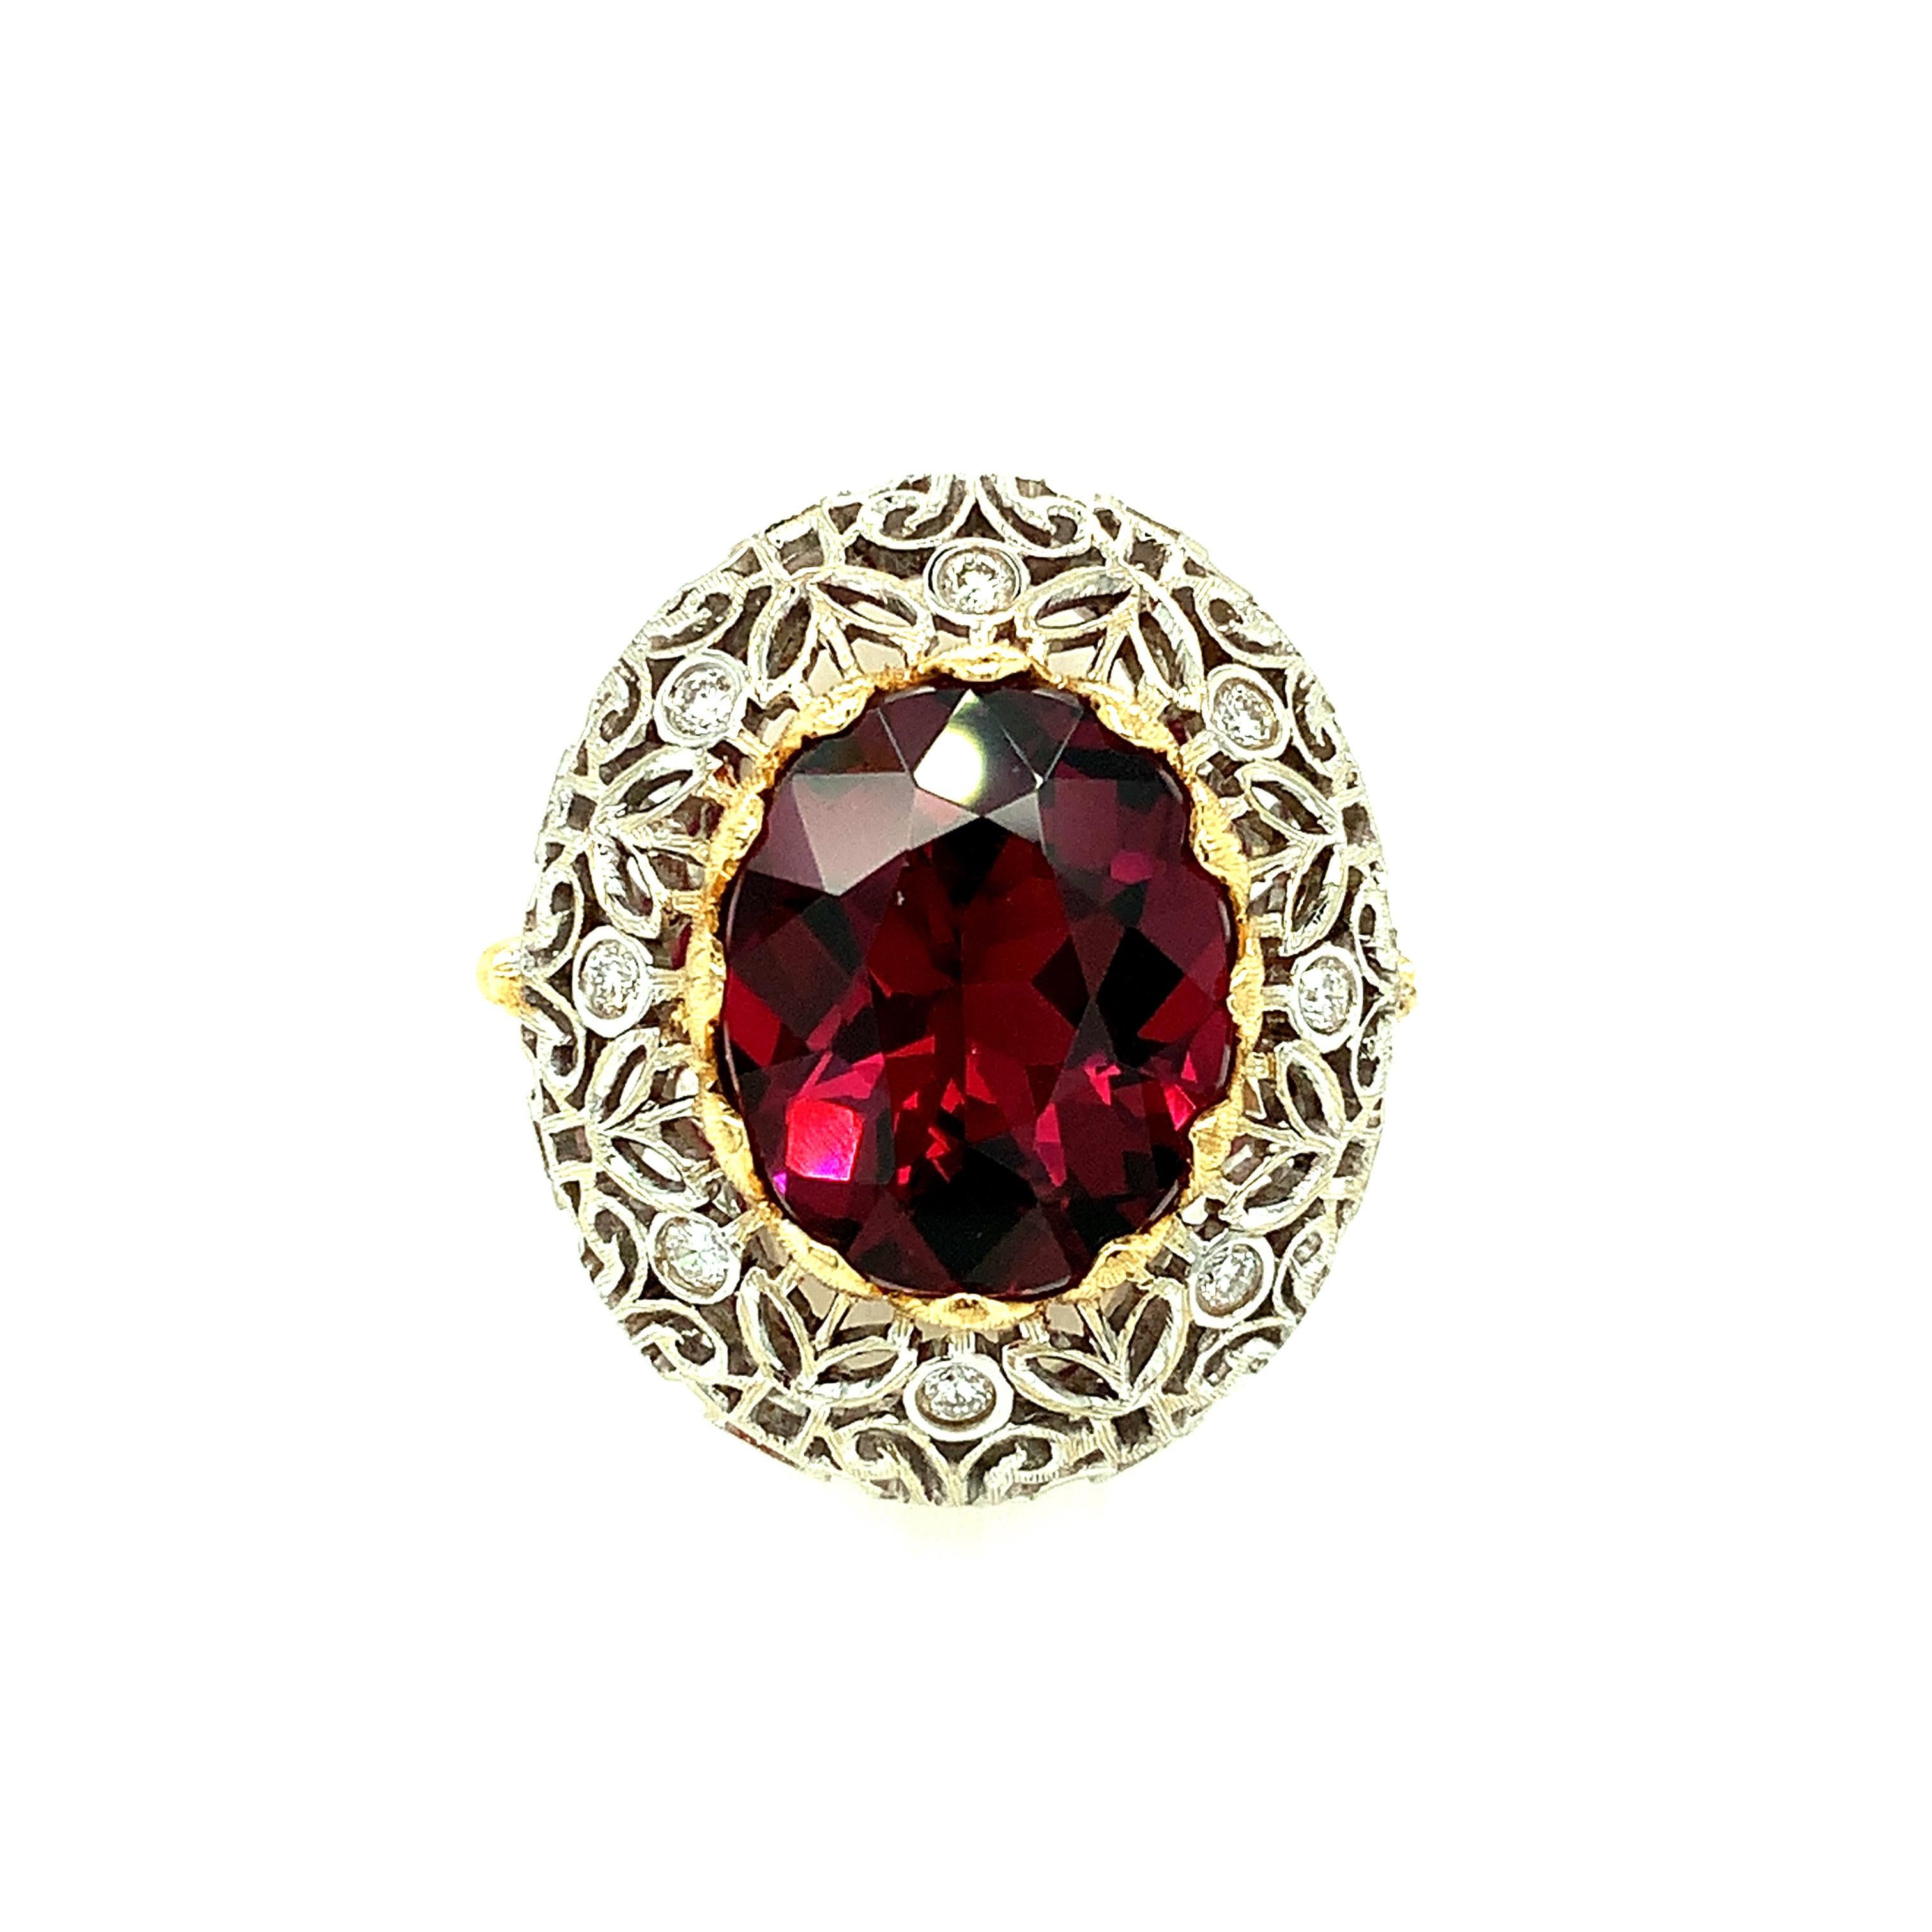 A stunning 8.98 carat oval rhodolite garnet is featured in this handmade, 18k yellow and white gold diamond cocktail ring. The center gemstone has deep, rich, pinkish red wine color (purplish pink, depending on the light). It is mounted in an